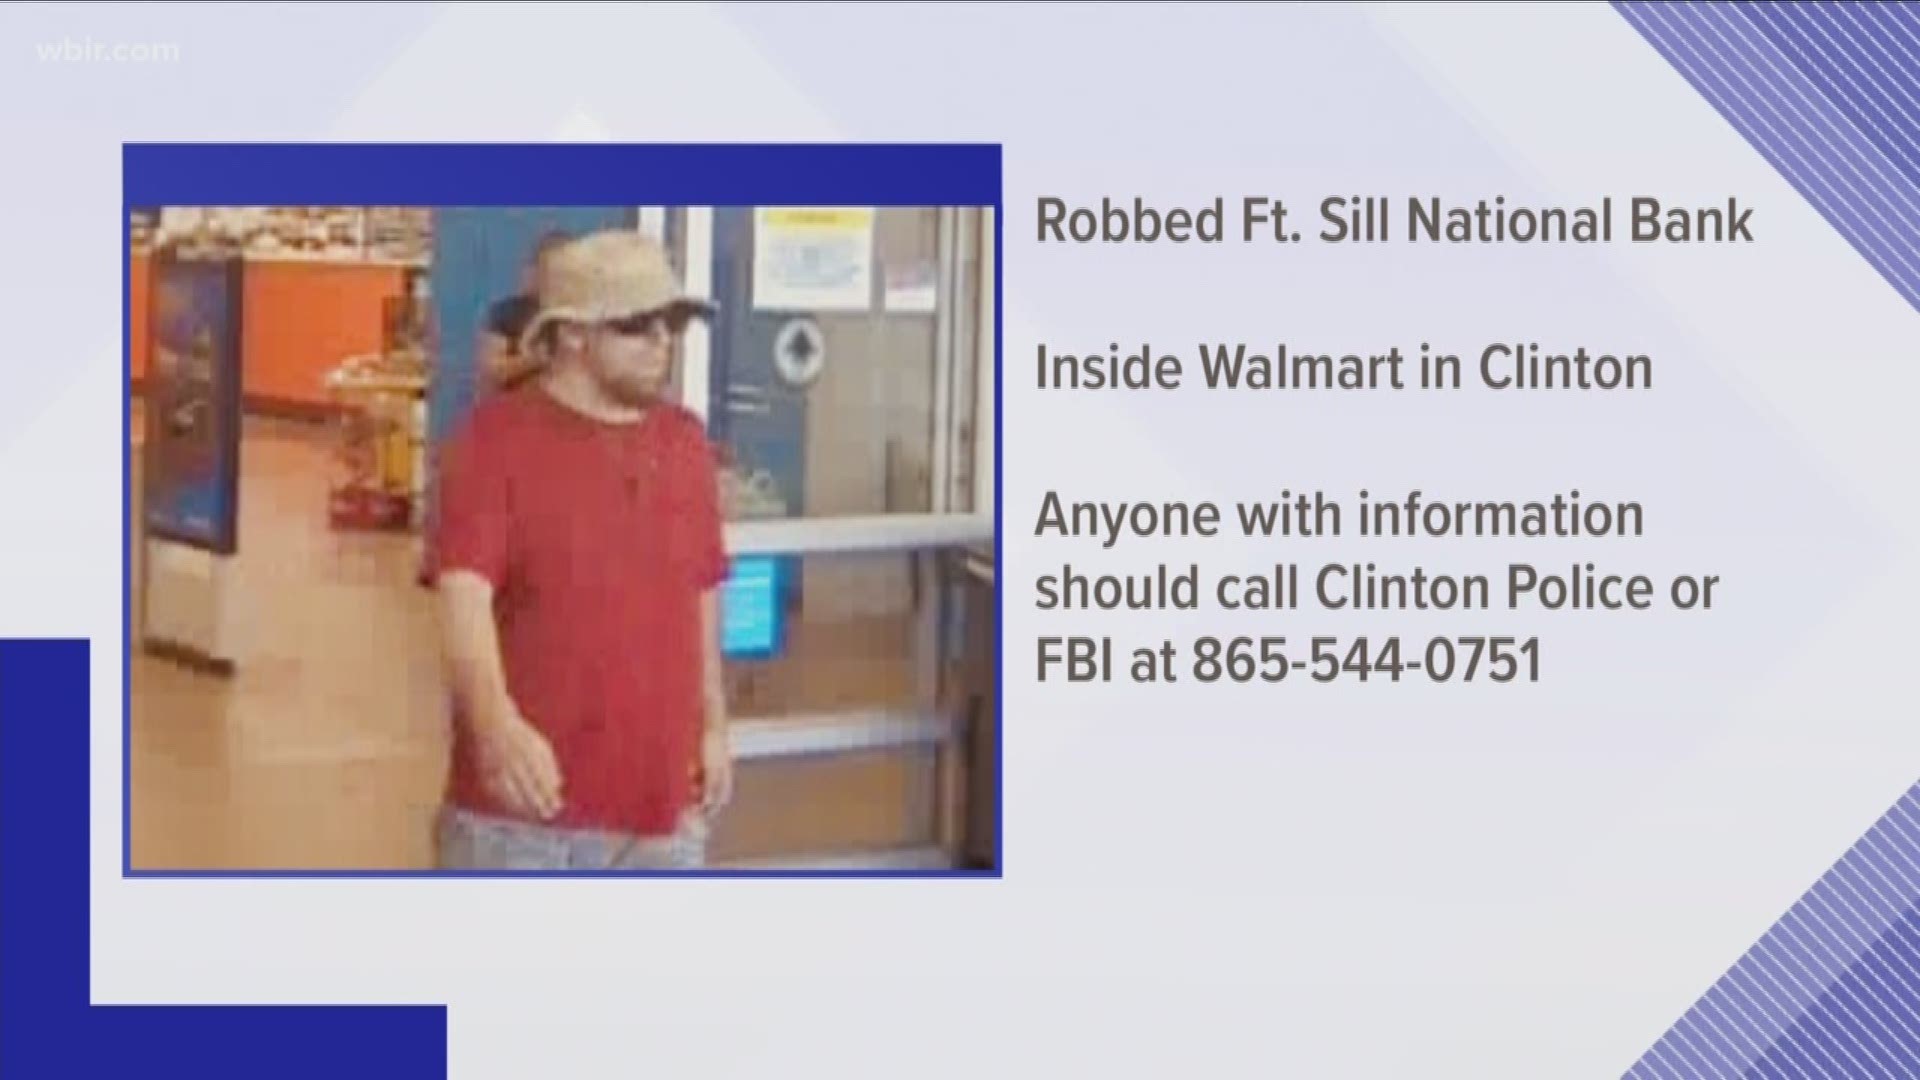 Agents say the man robbed the Fort Sill National Bank inside the Walmart in Clinton.